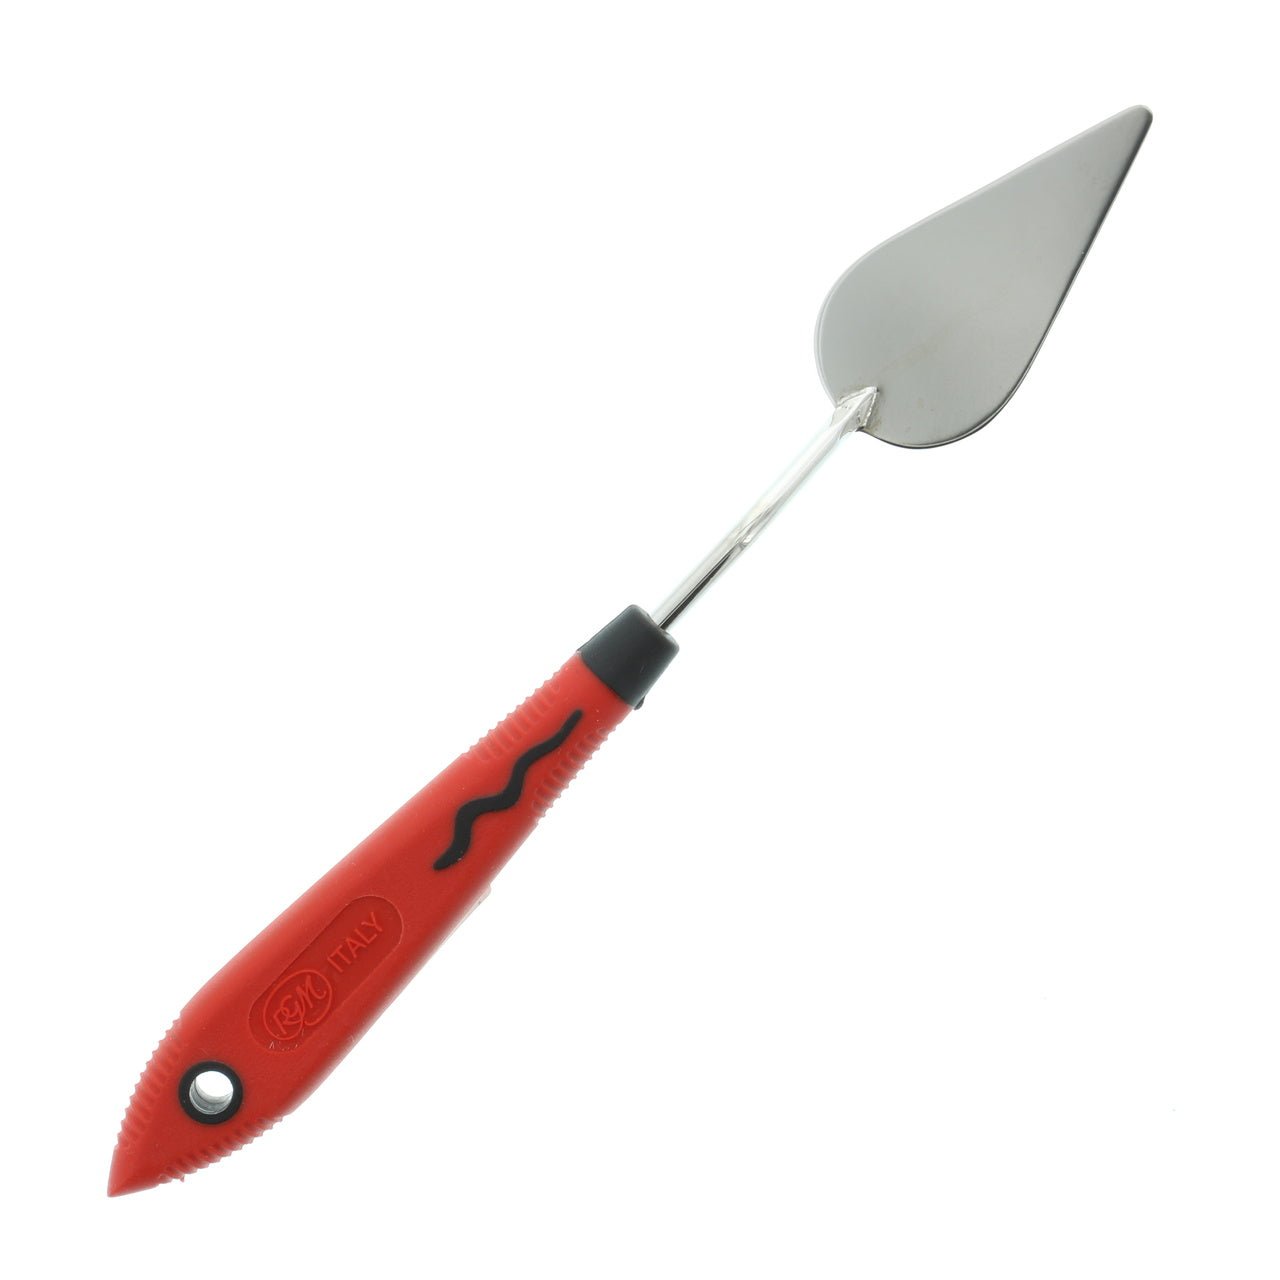 RGM Soft Grip Painting Knife #031 (Red Handle)